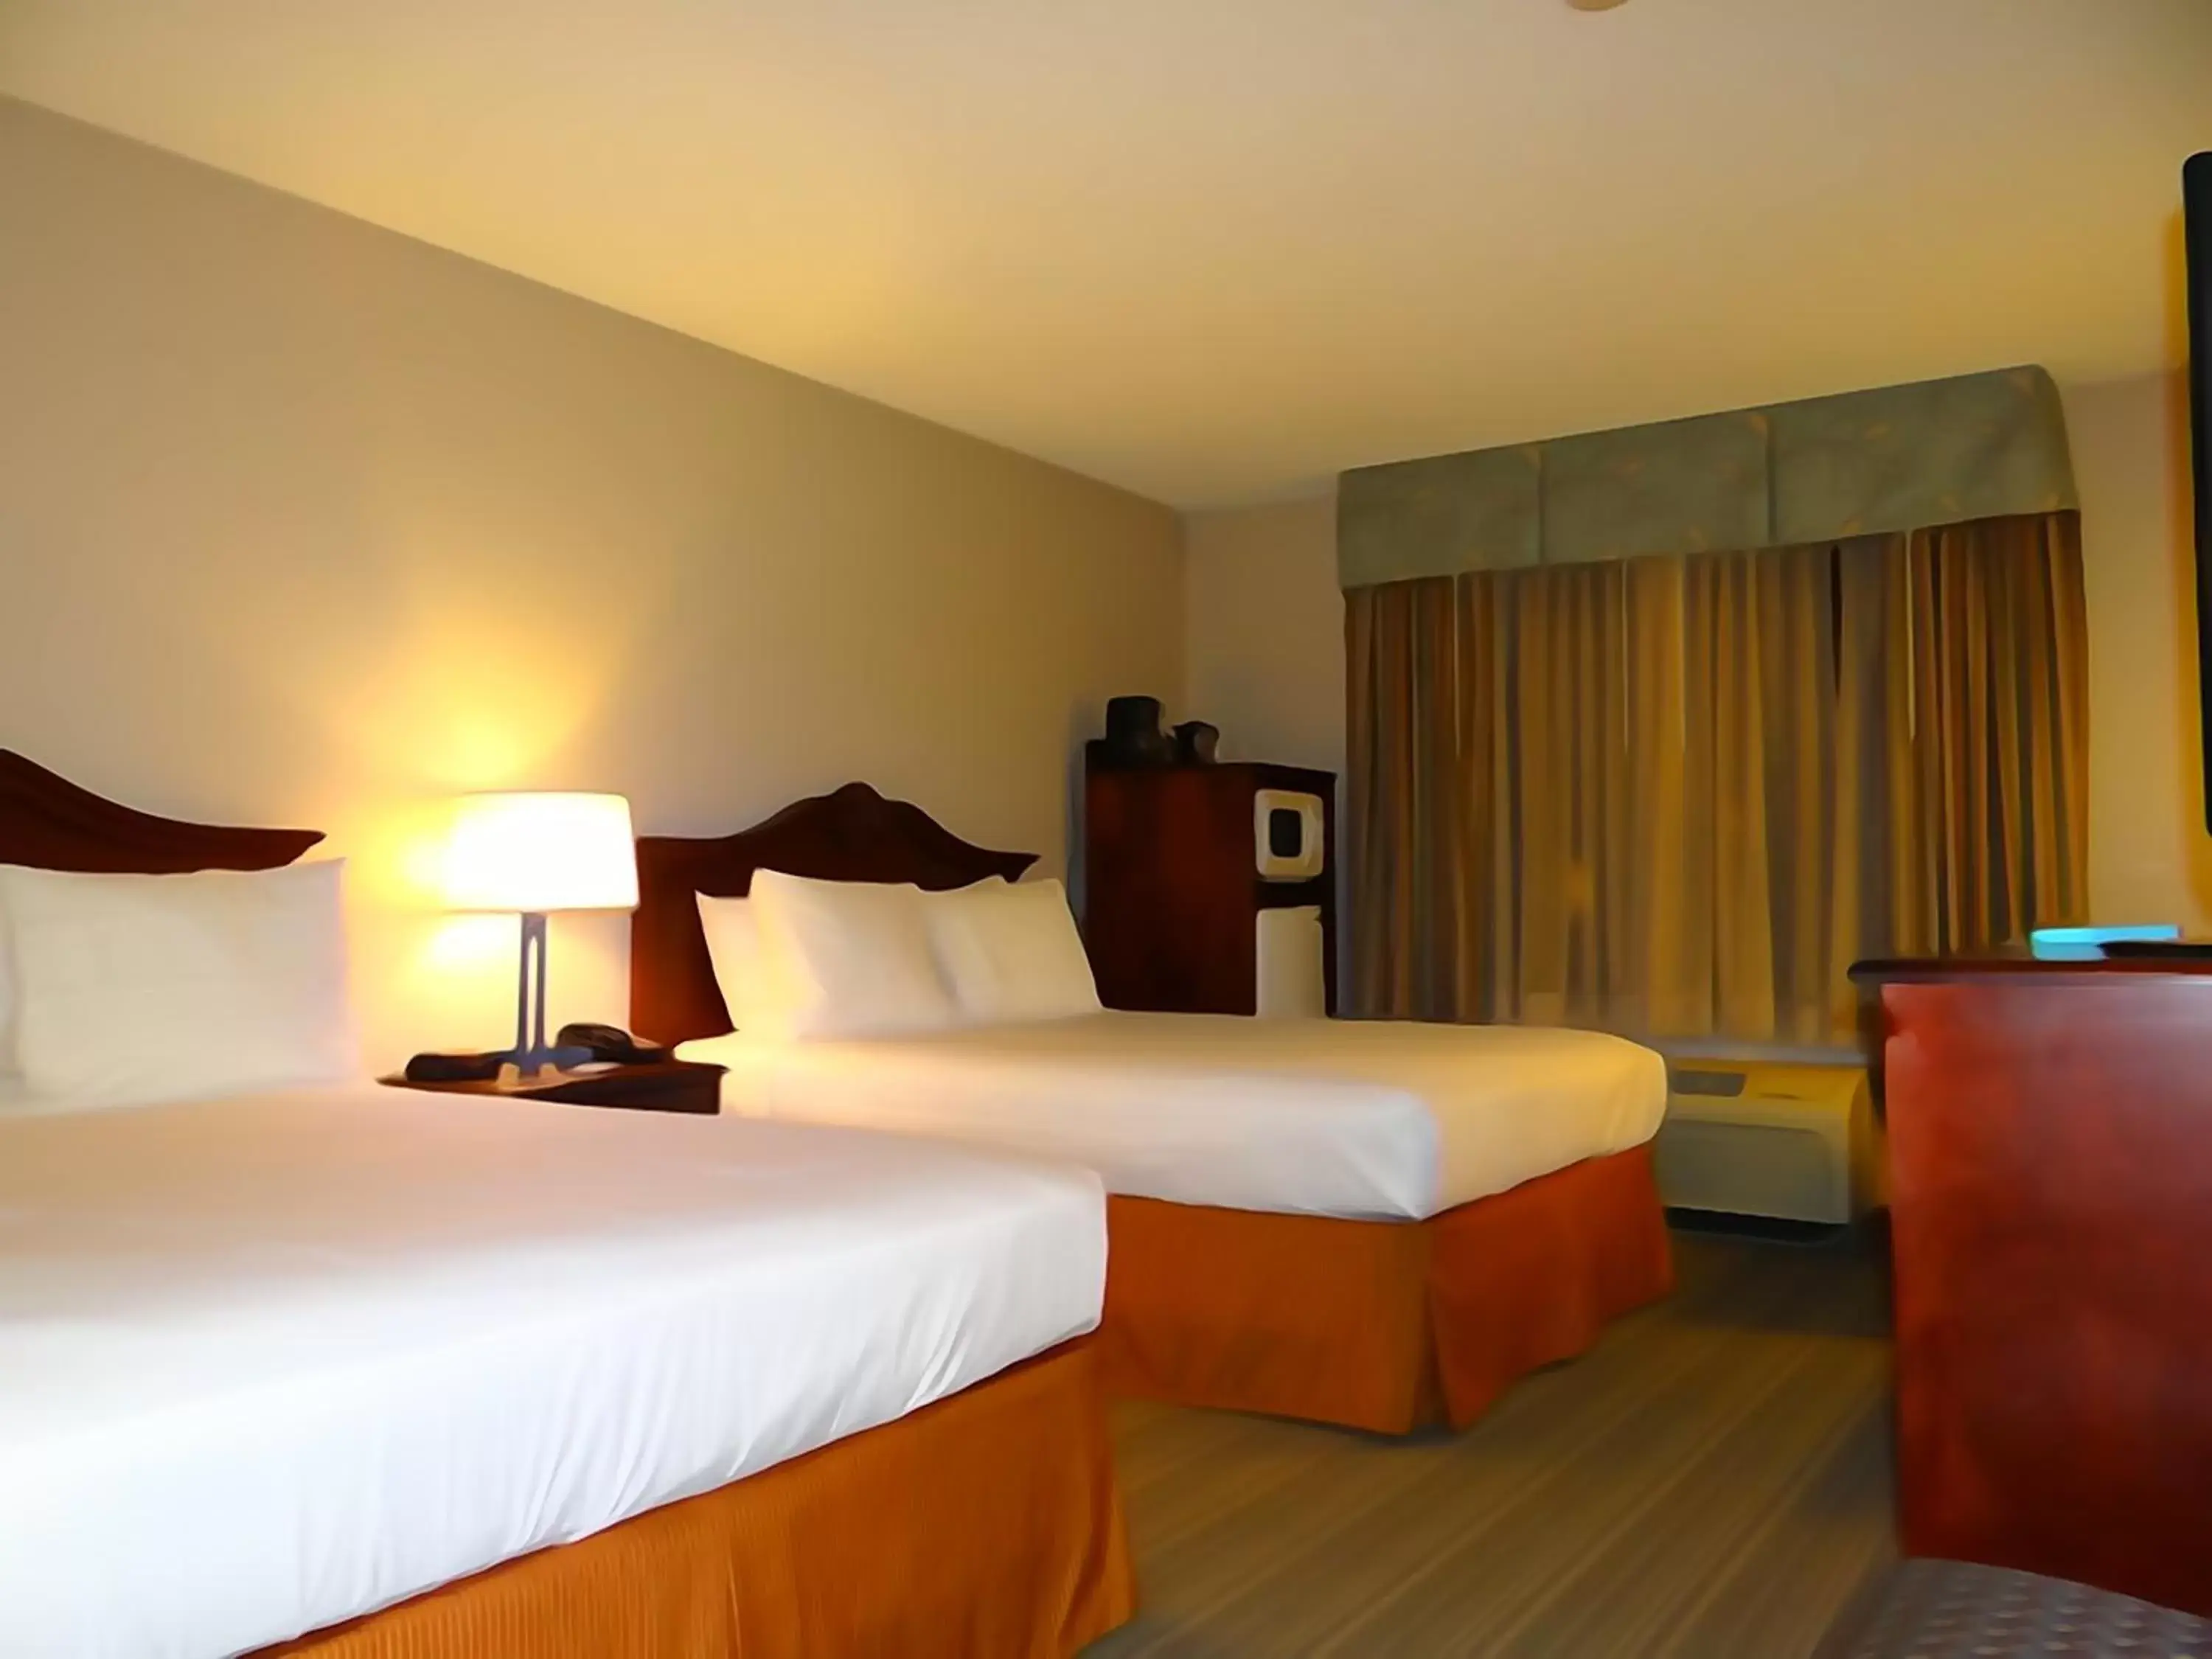 Queen Room with Two Queen Beds in Country Inn & Suites by Radisson, Salisbury, MD